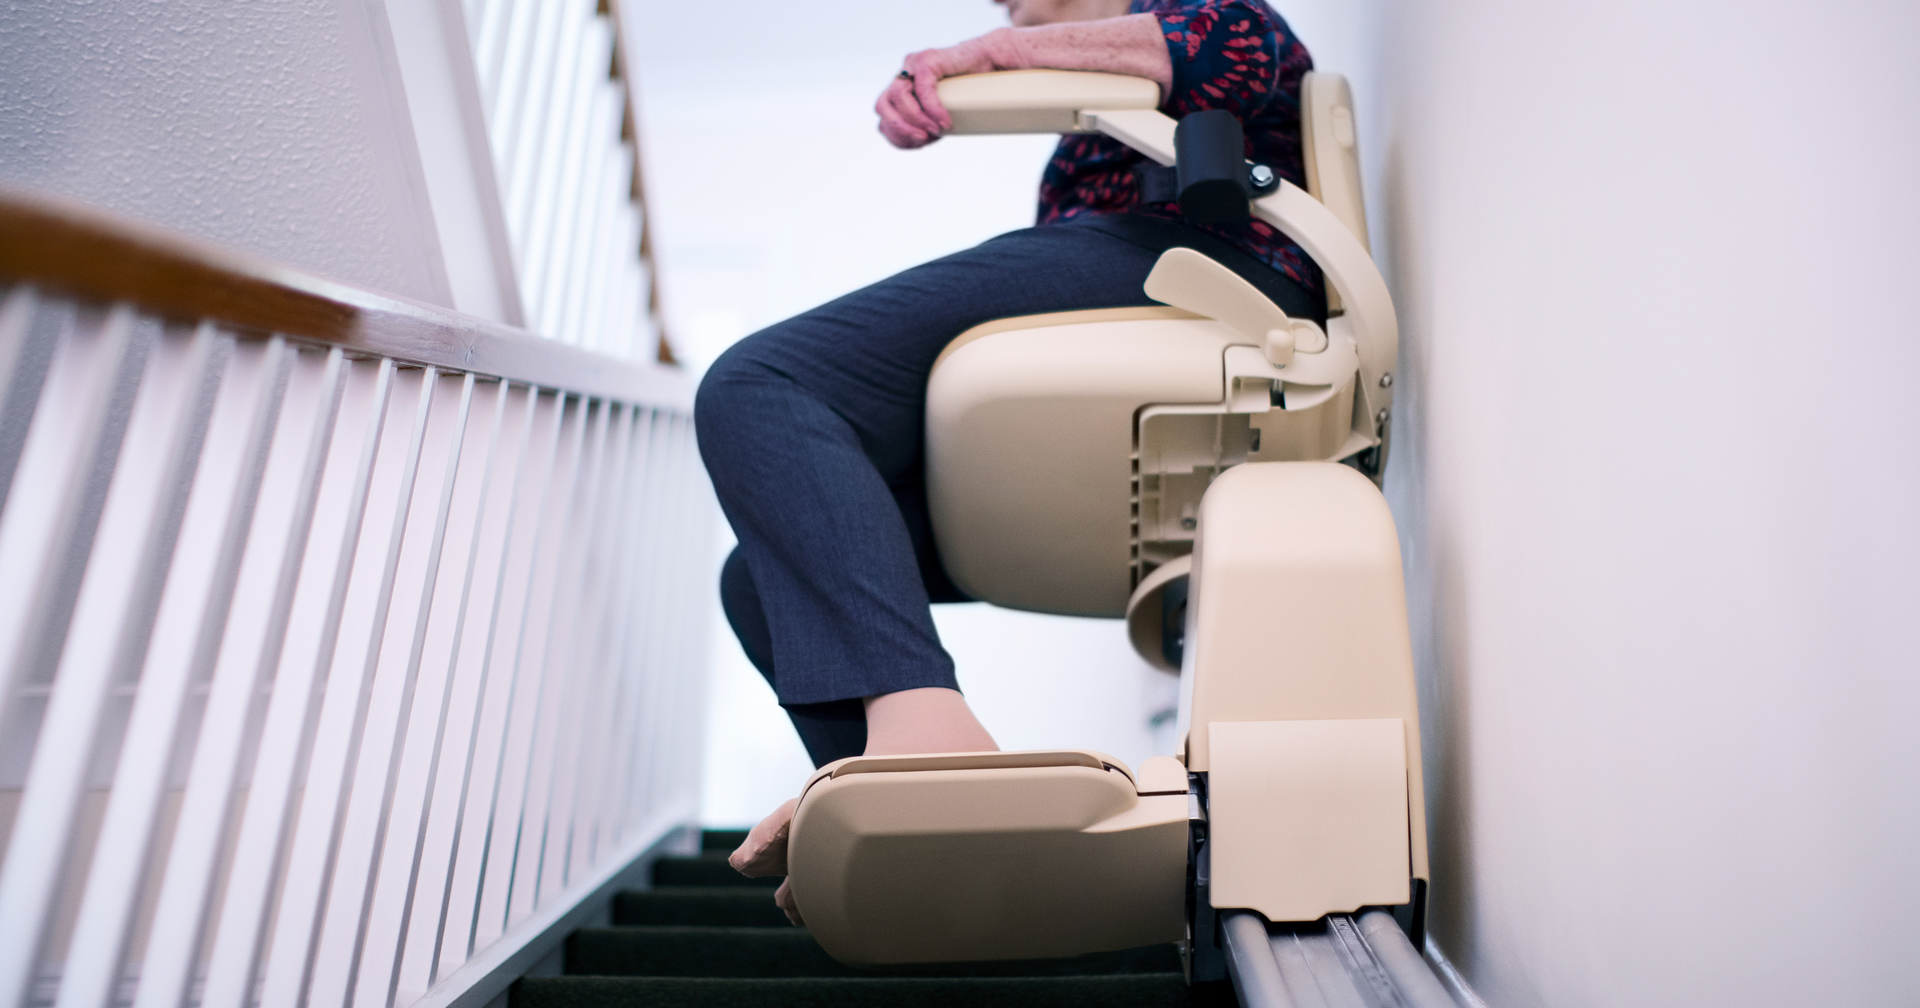 Navigating Your Home with Ease: Stairlifts and Transfer Seats